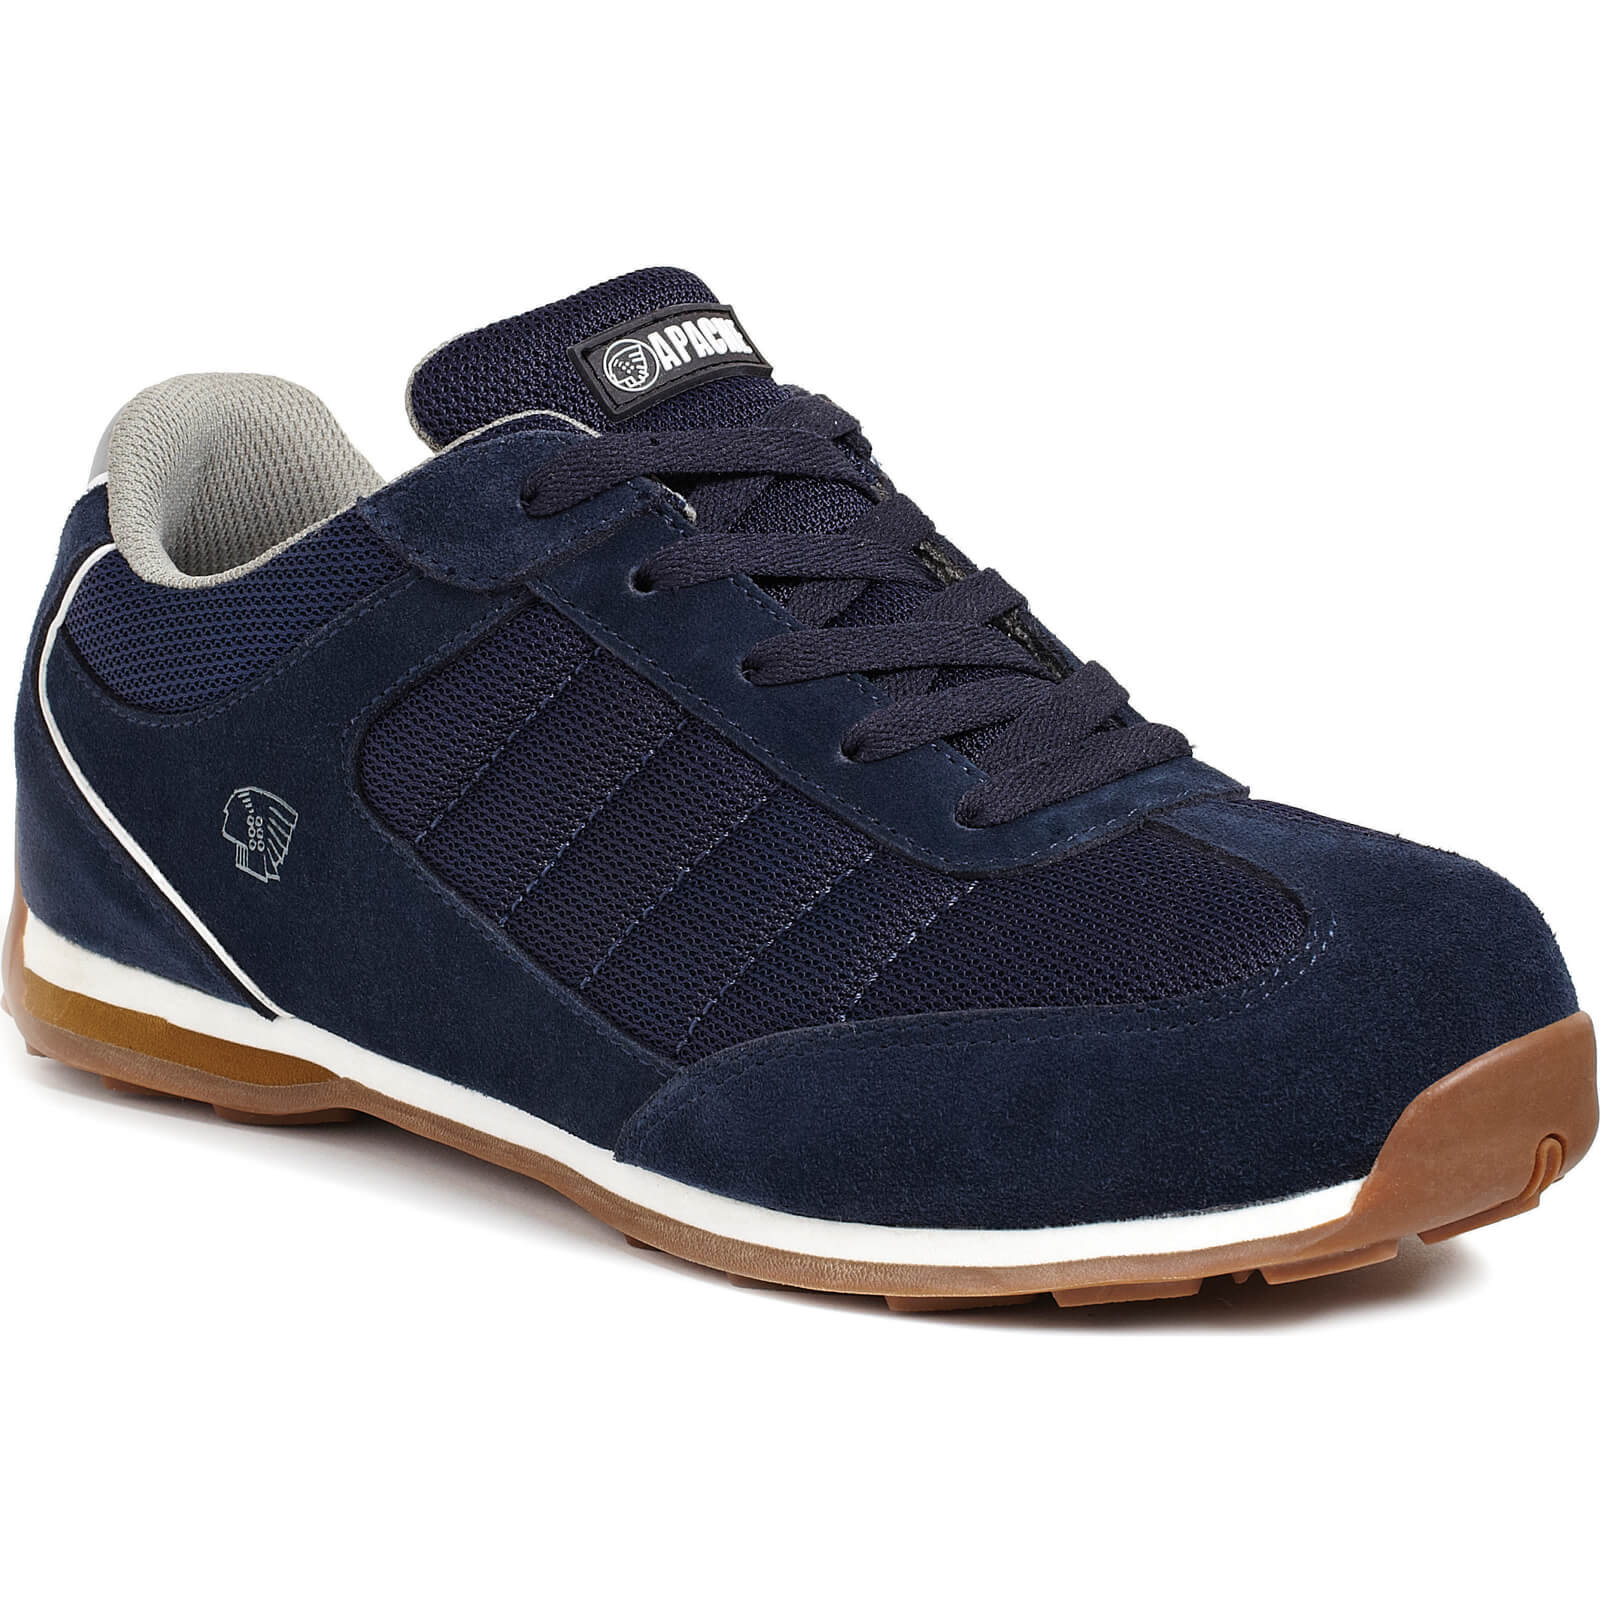 Apache Strike Suede Retro Safety Trainers Navy Size 8